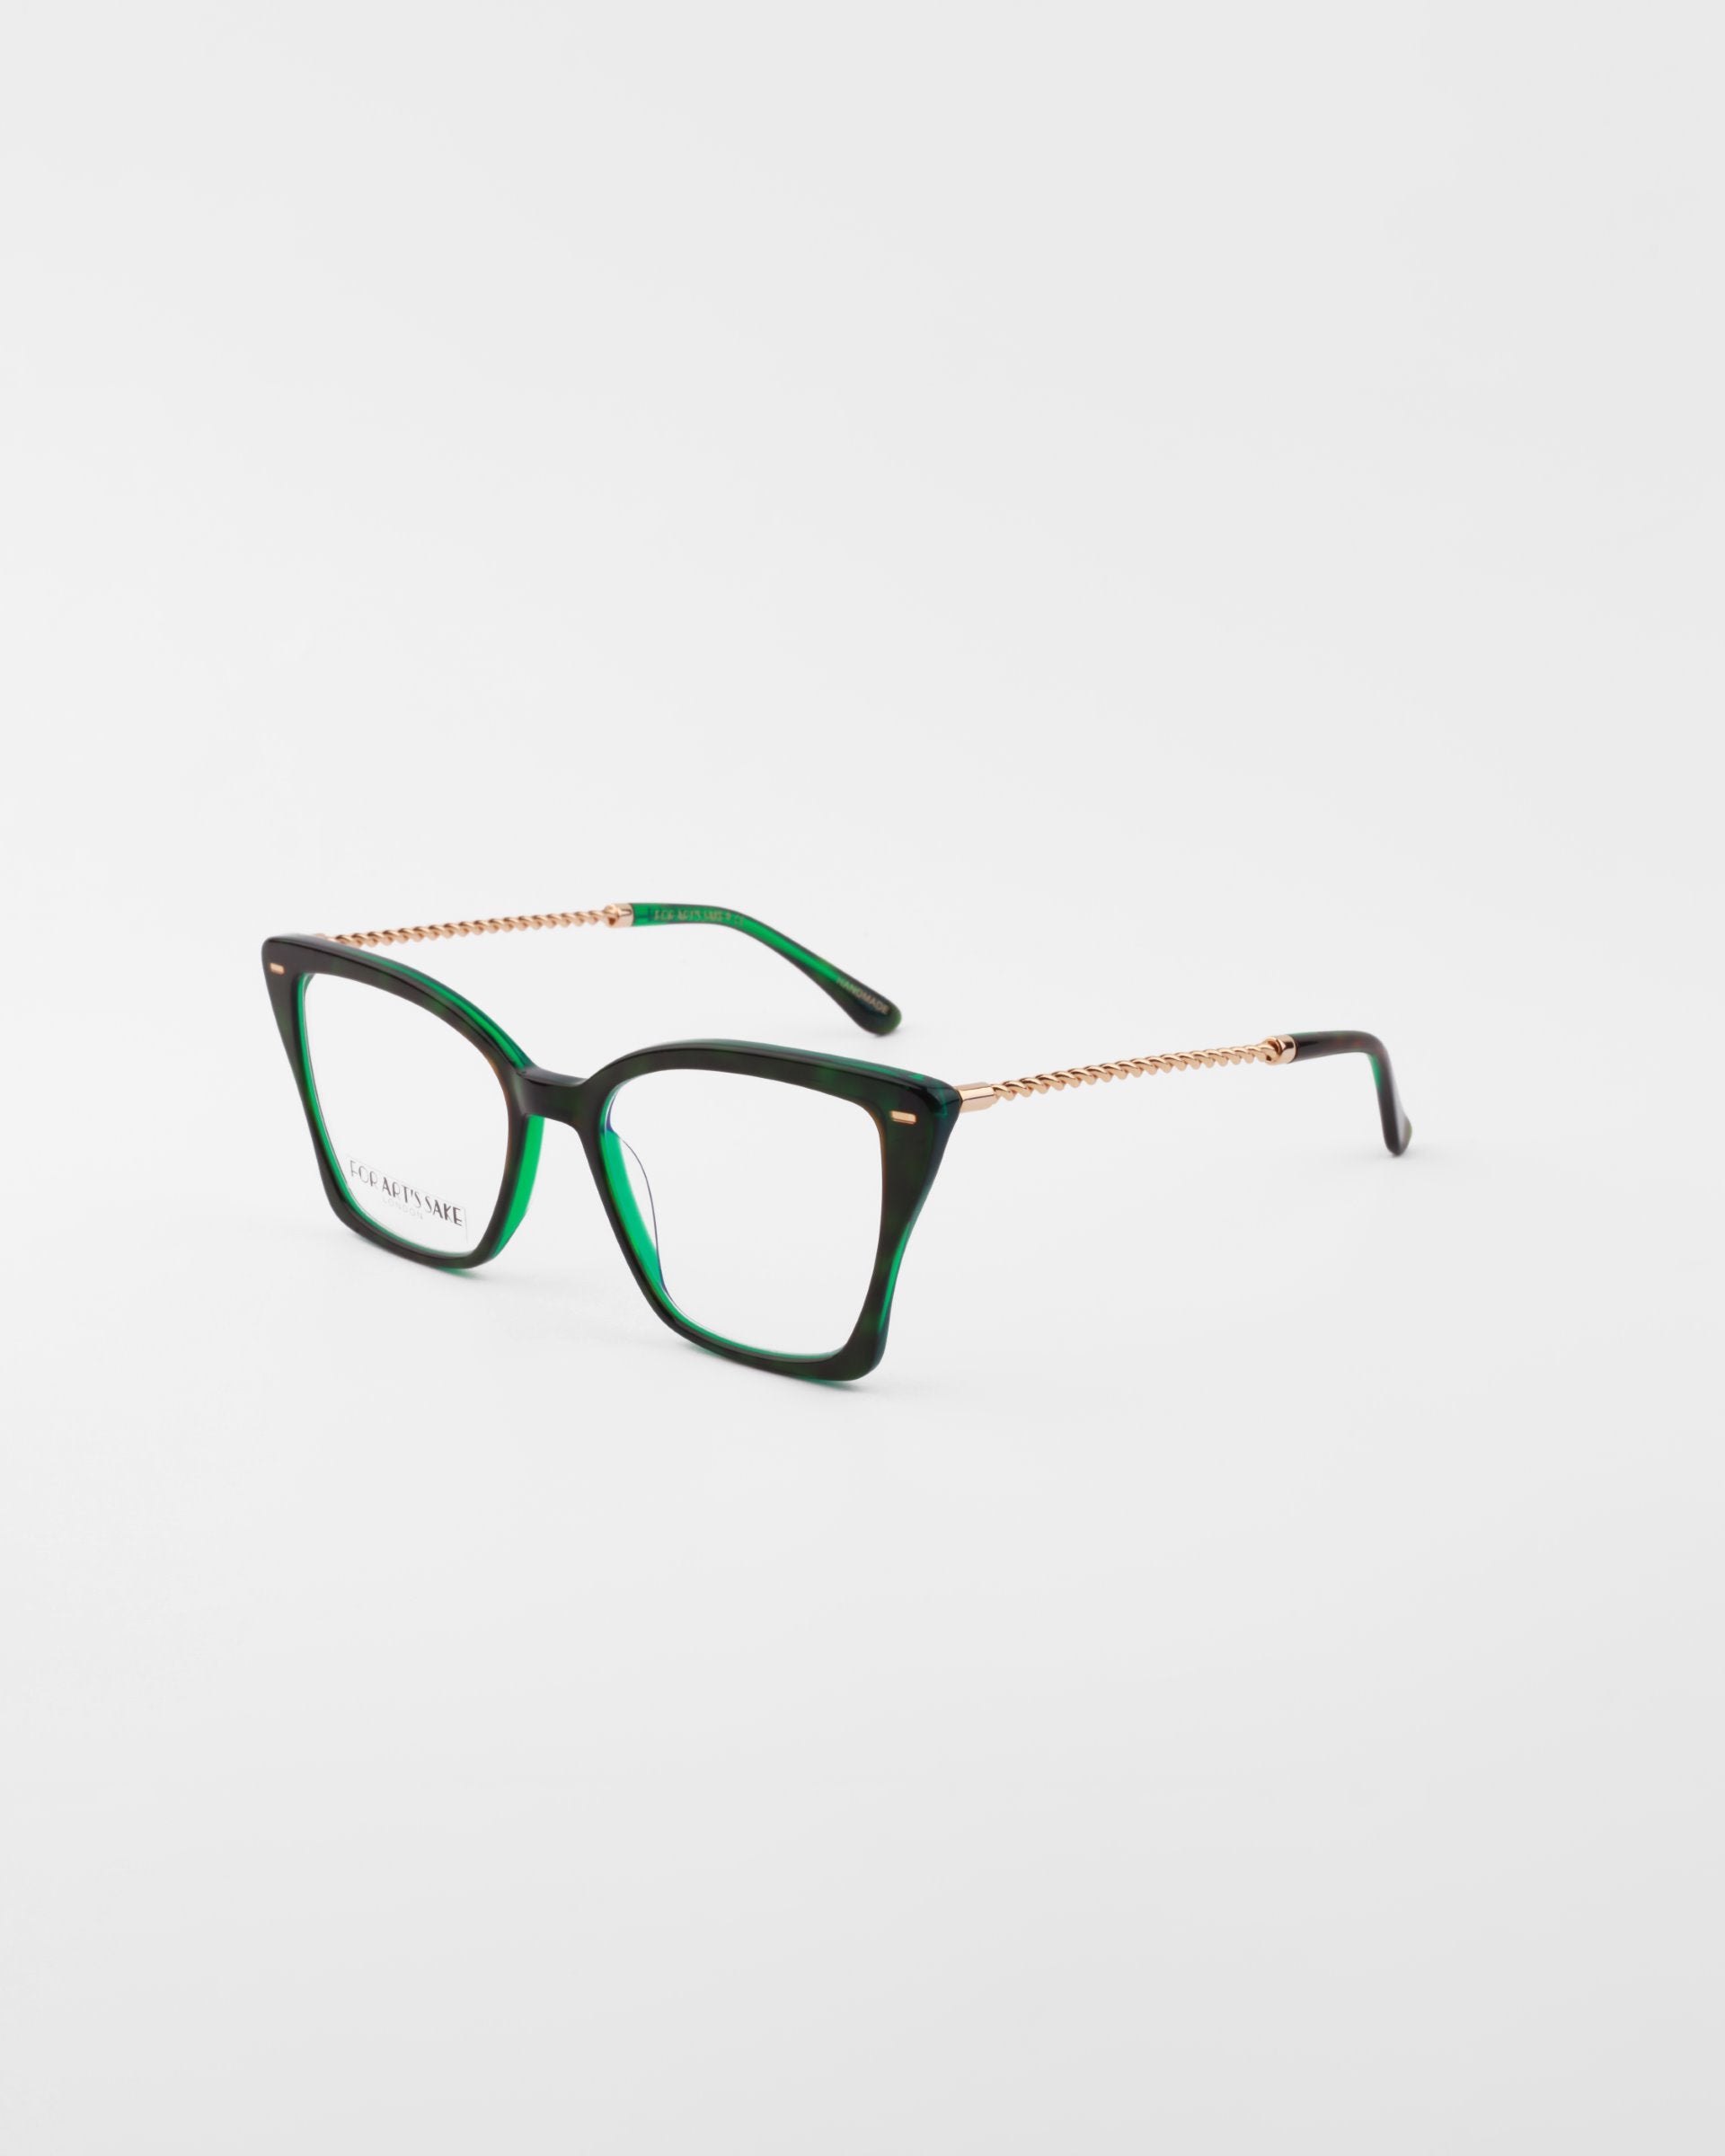 A pair of dark green cat-eye eyeglasses with gold-toned metal temples, featuring clear lenses and a glossy finish. These stylish Dion glasses by For Art&#39;s Sake®, enhanced with blue light filter lenses, are photographed against a plain white background.